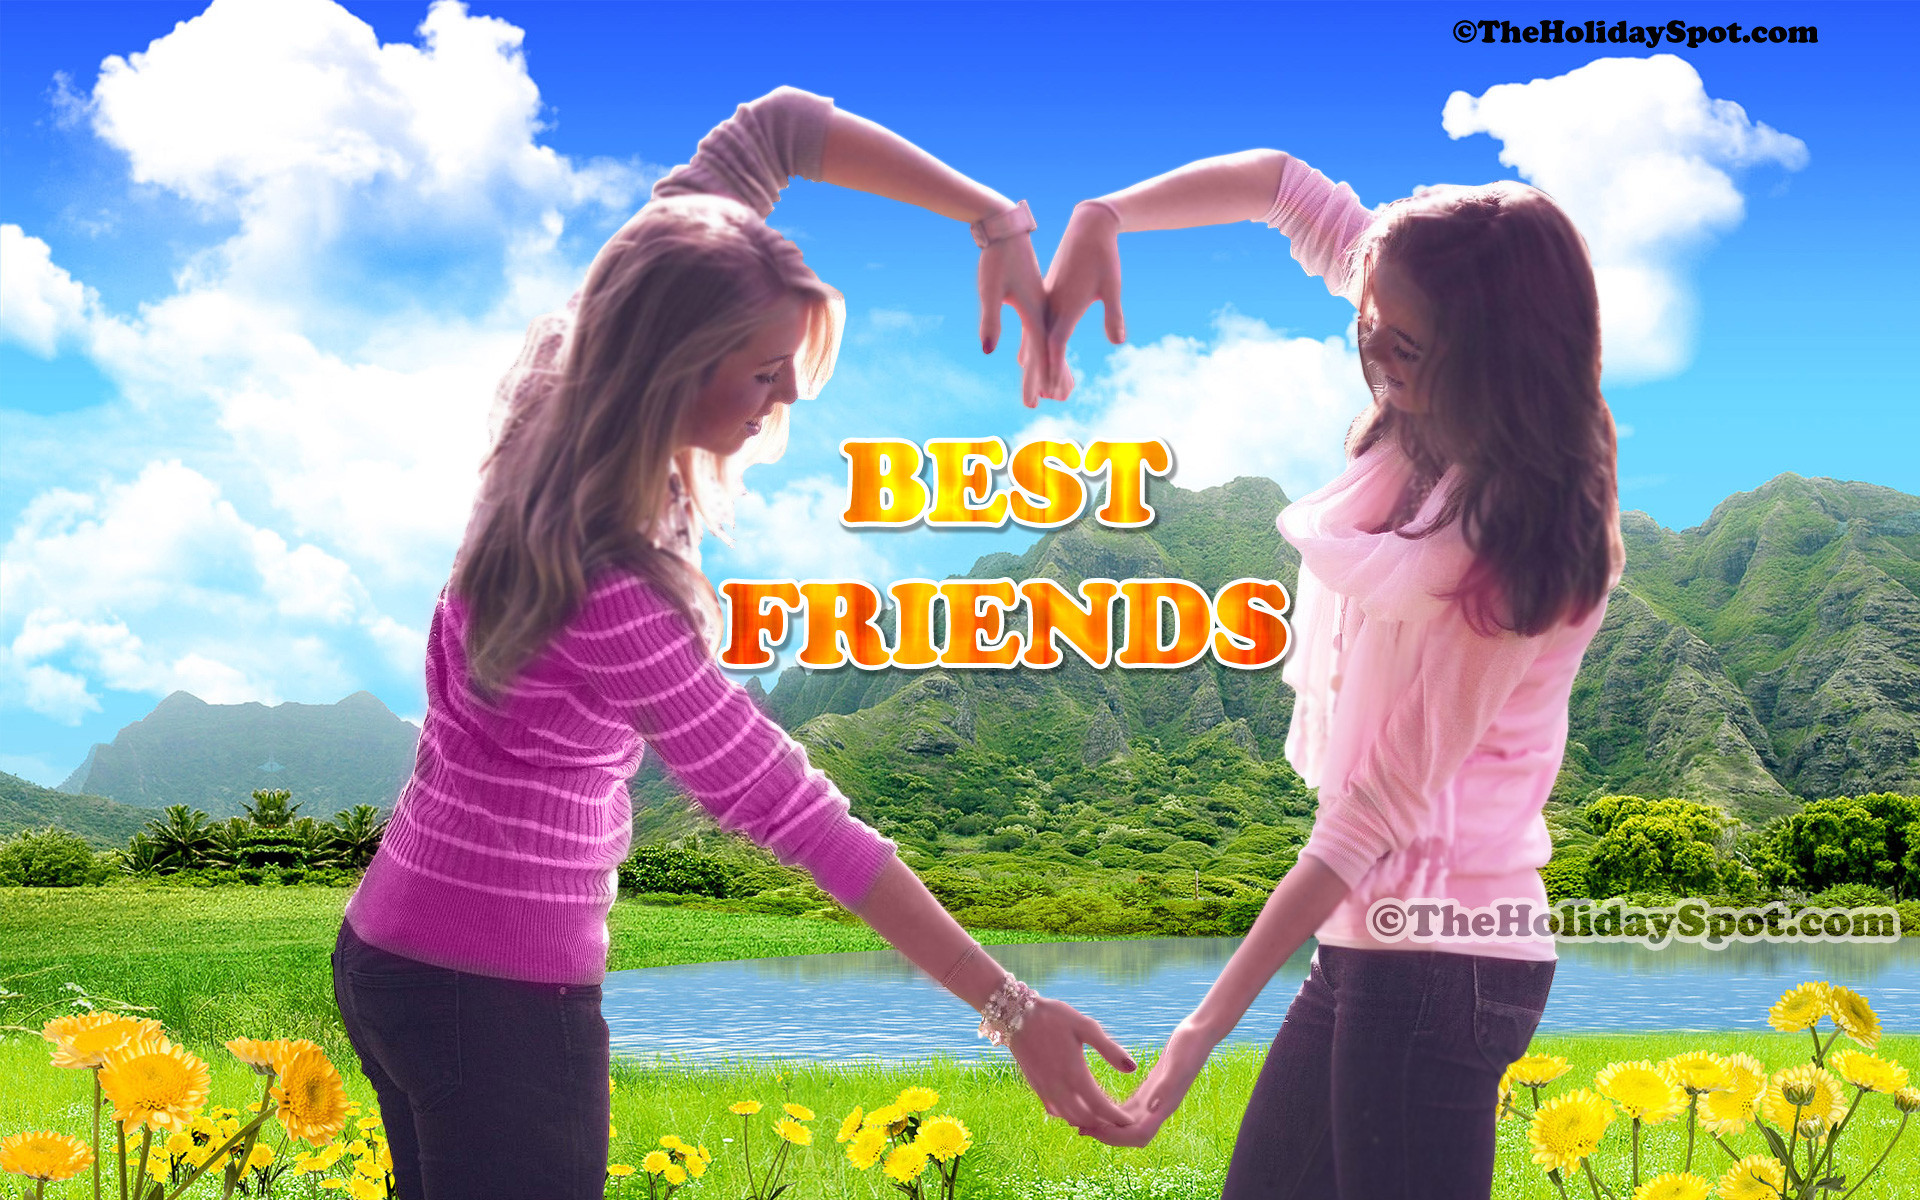 Free Wallpaper Downloads   Day Wallpaper Free Download Download free  Wallpapers   Friendship day wallpaper Friendship wallpaper Happy  friendship day images